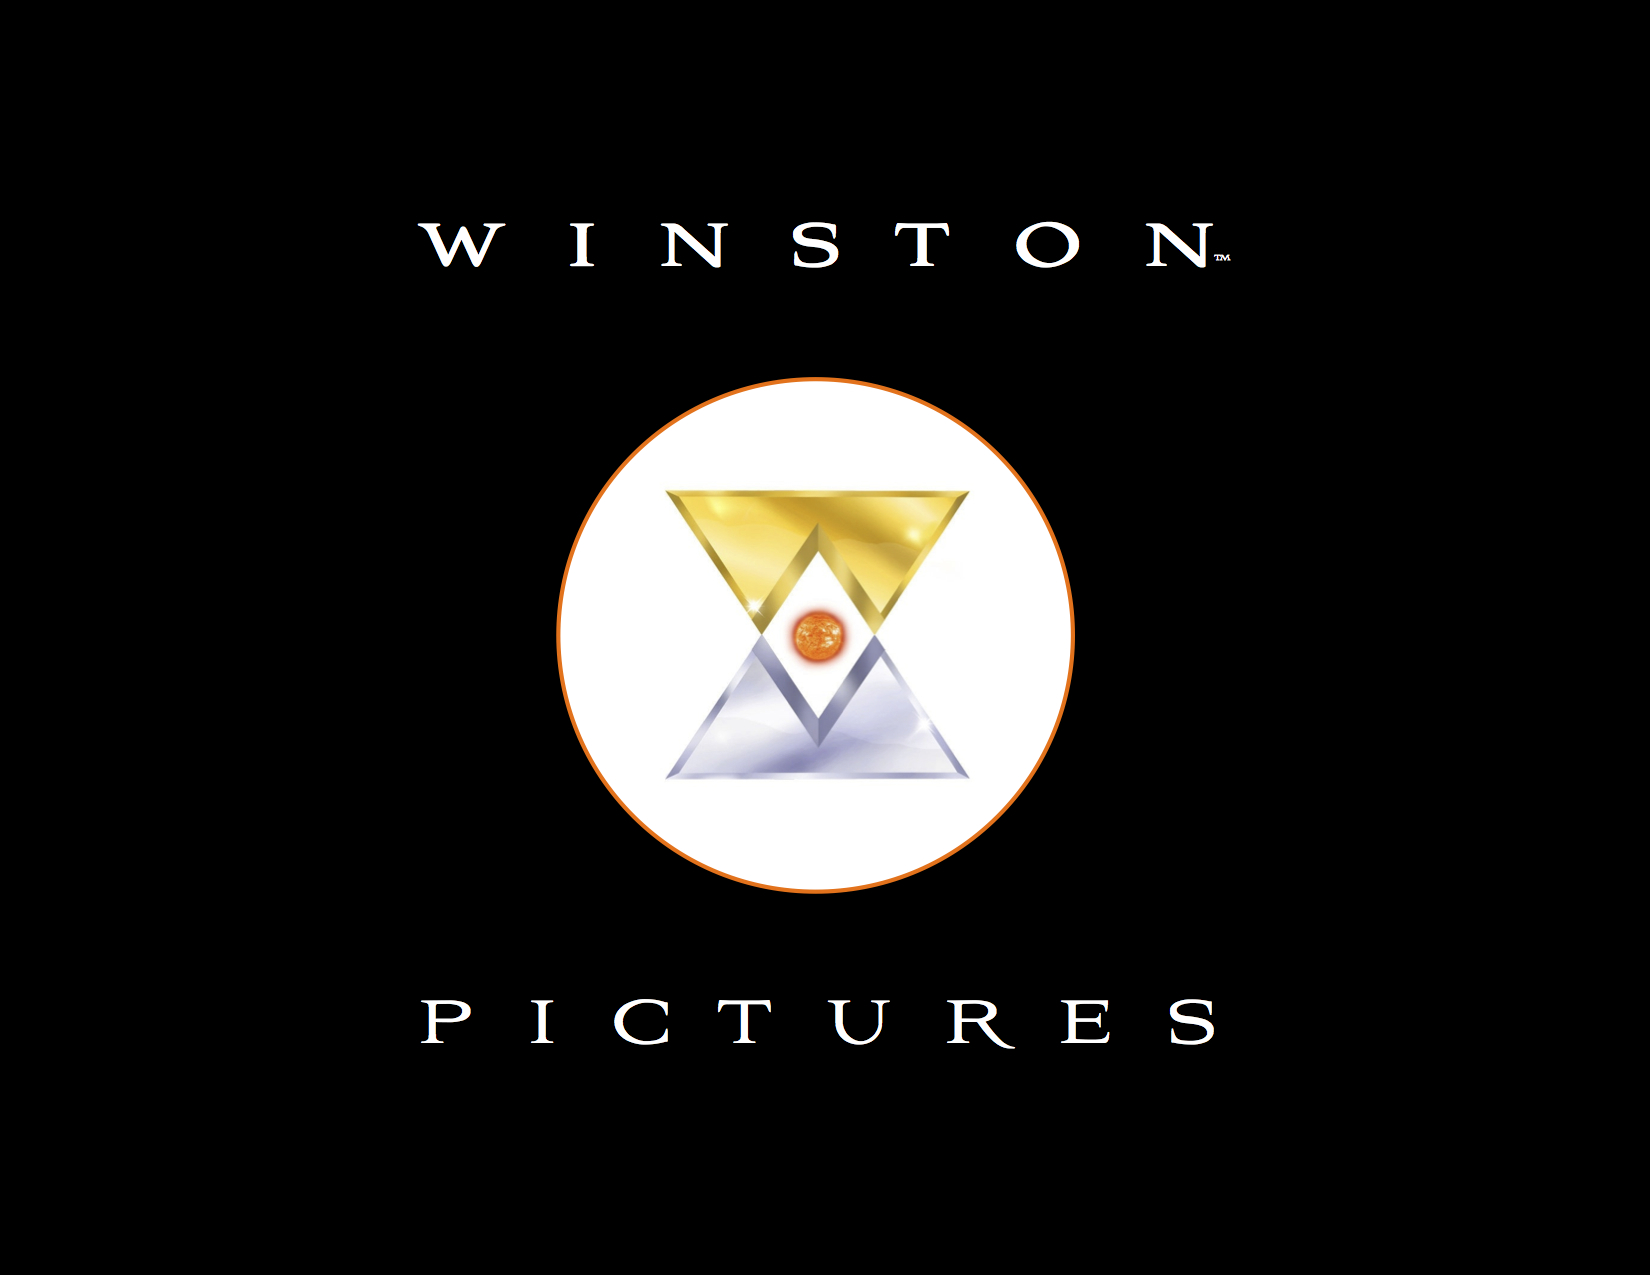 WINSTON PICTURES OFFICIAL LOGO AND BRANDING ©WINSTON PICTURES 2014 All rights reserved